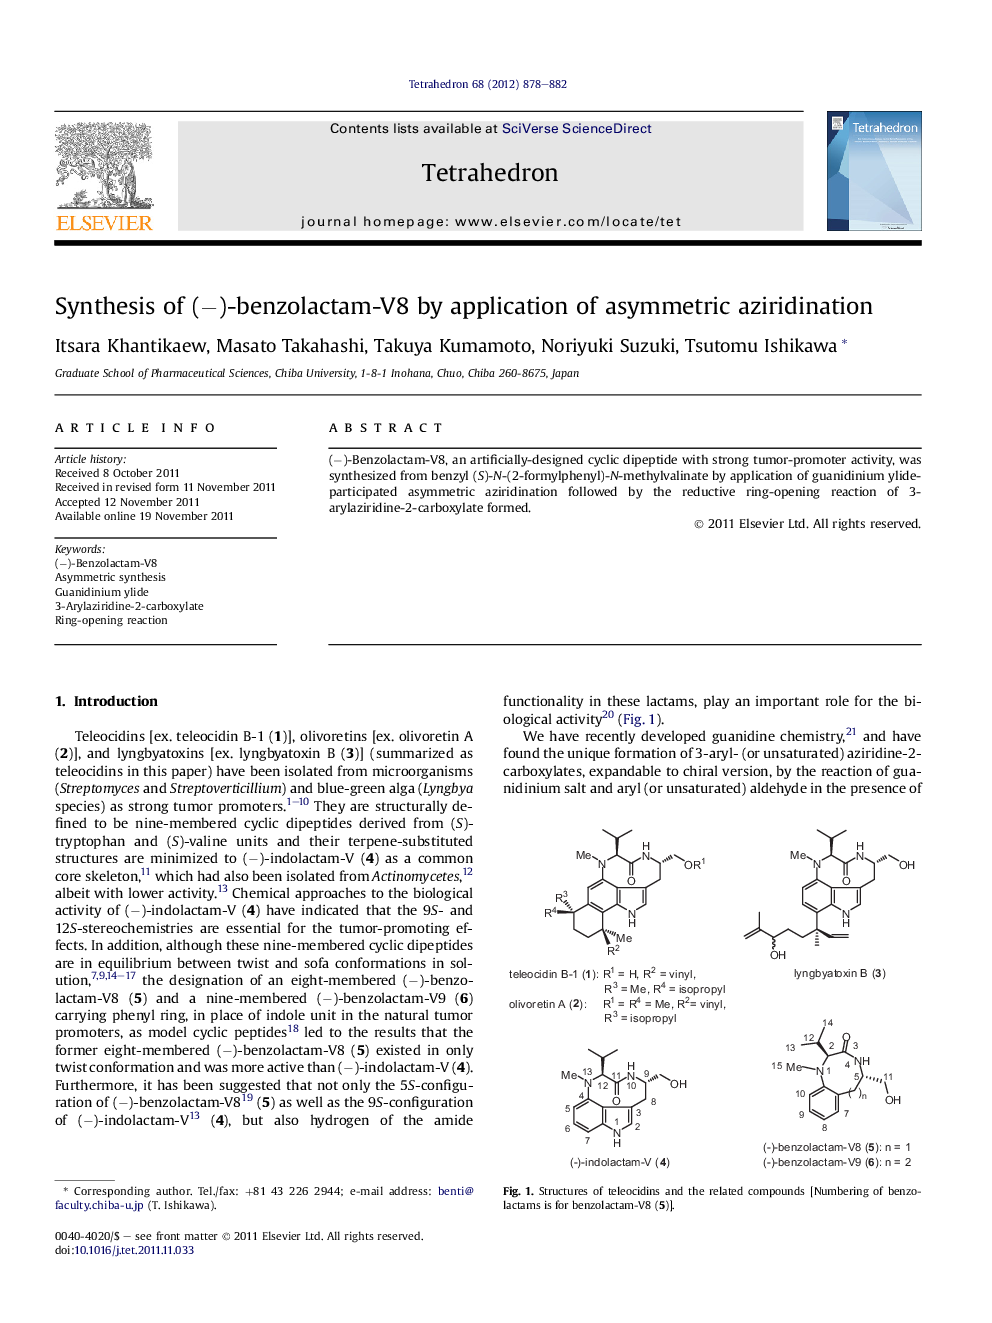 Synthesis of (â)-benzolactam-V8 by application of asymmetric aziridination